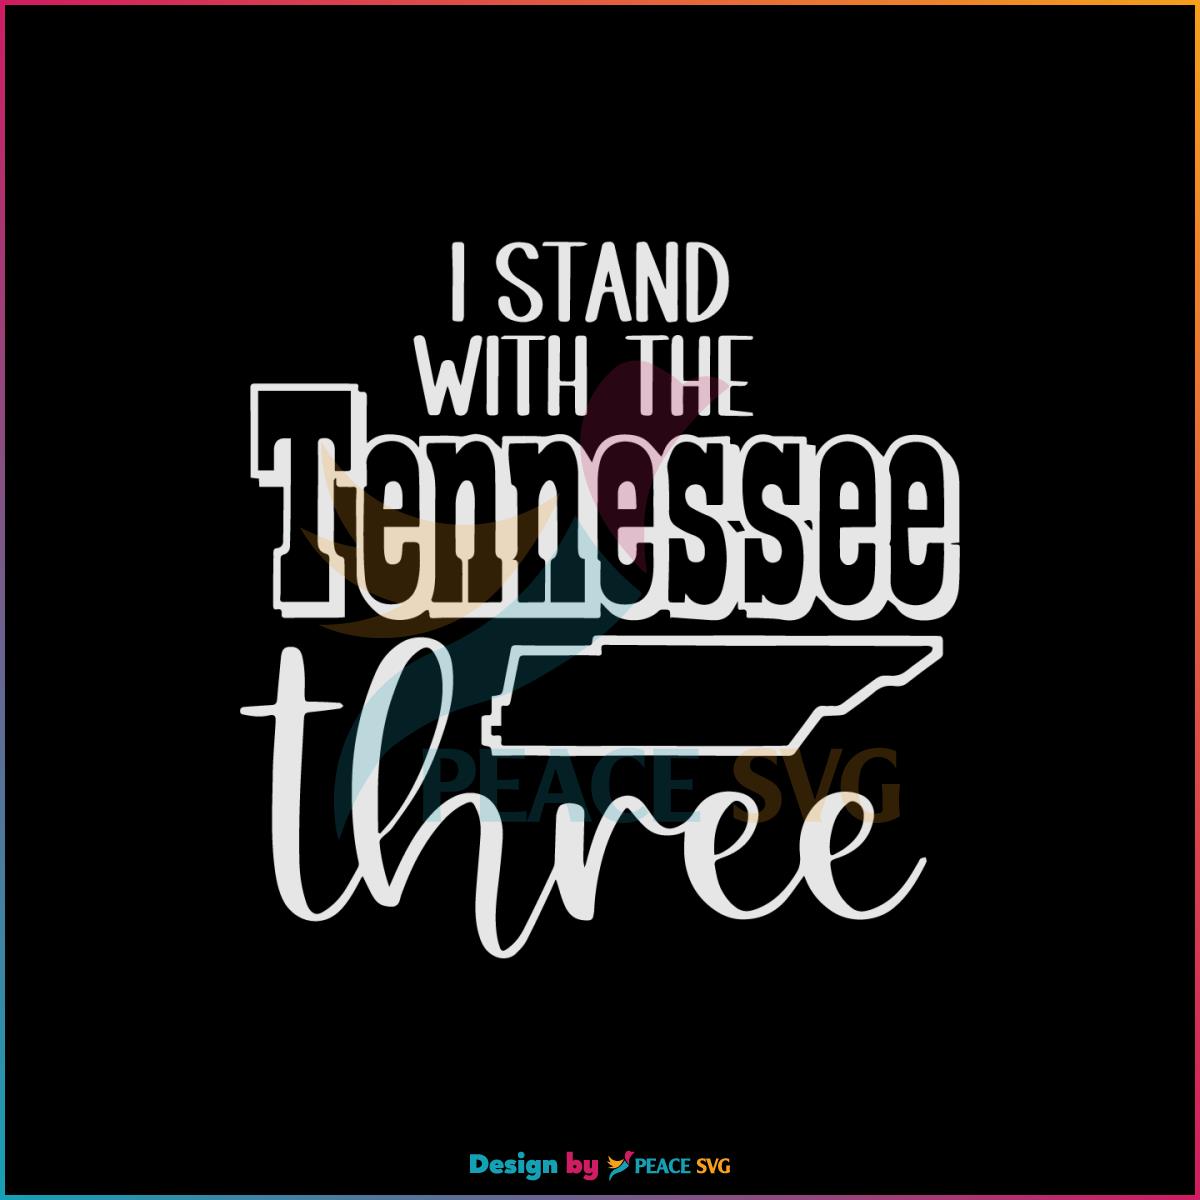 I Stand With The Tennessee Three Justin Jone SVG Cutting Files